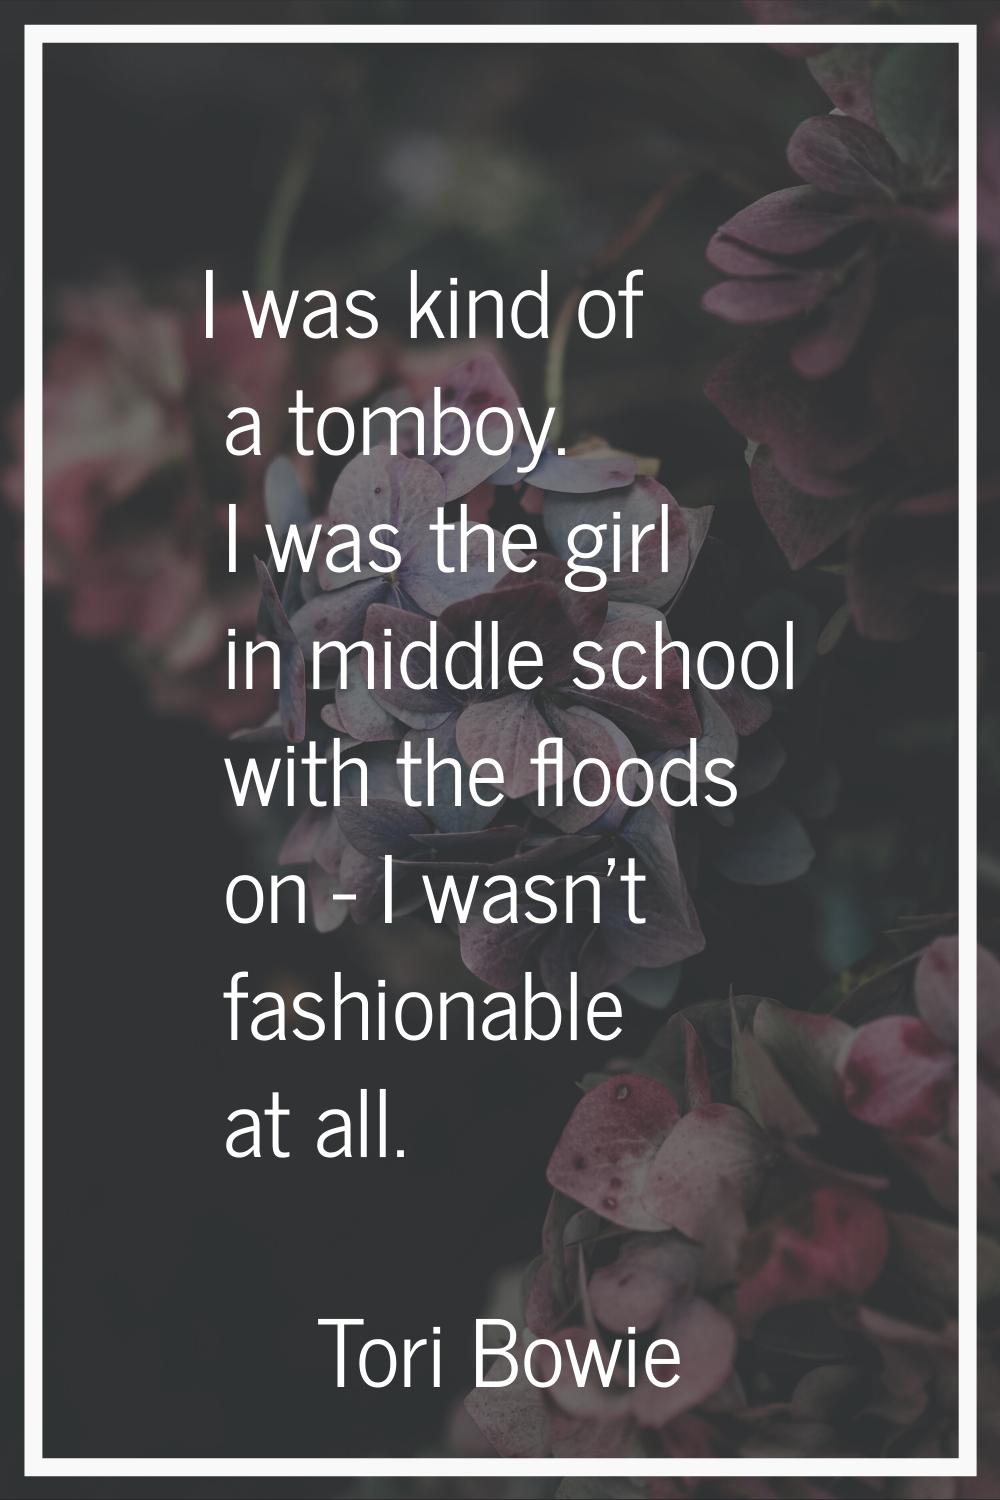 I was kind of a tomboy. I was the girl in middle school with the floods on - I wasn't fashionable a